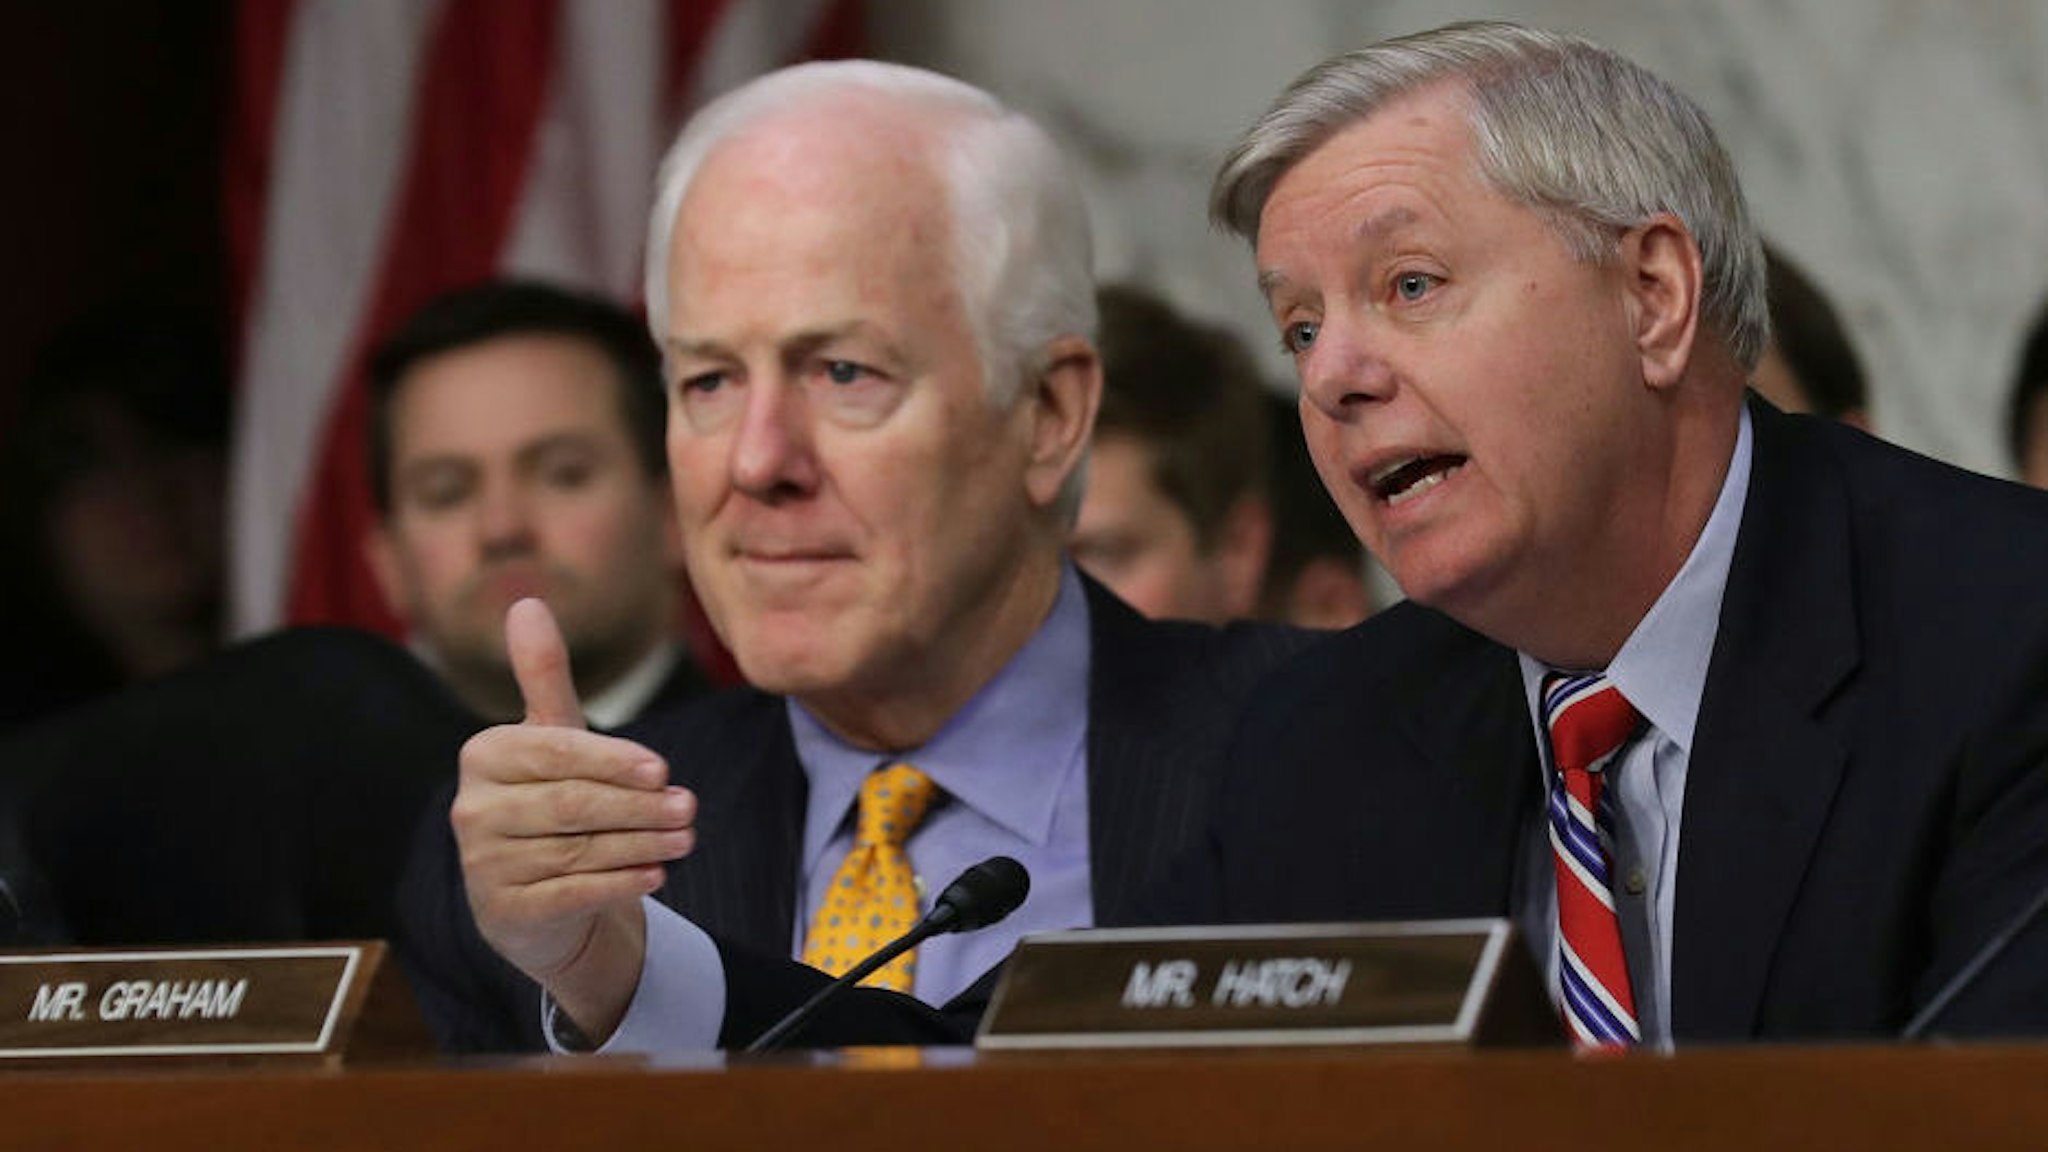 Senate Judiciary Committee member Sen. Lindsey Graham (R-SC) (R) delivers an opening statement with Sen. John Cornyn (R-TX) during Judge Neil Gorsuch's Supreme Court confirmation hearing in the Hart Senate Office Building on Capitol Hill March 20, 2017 in Washington, DC.